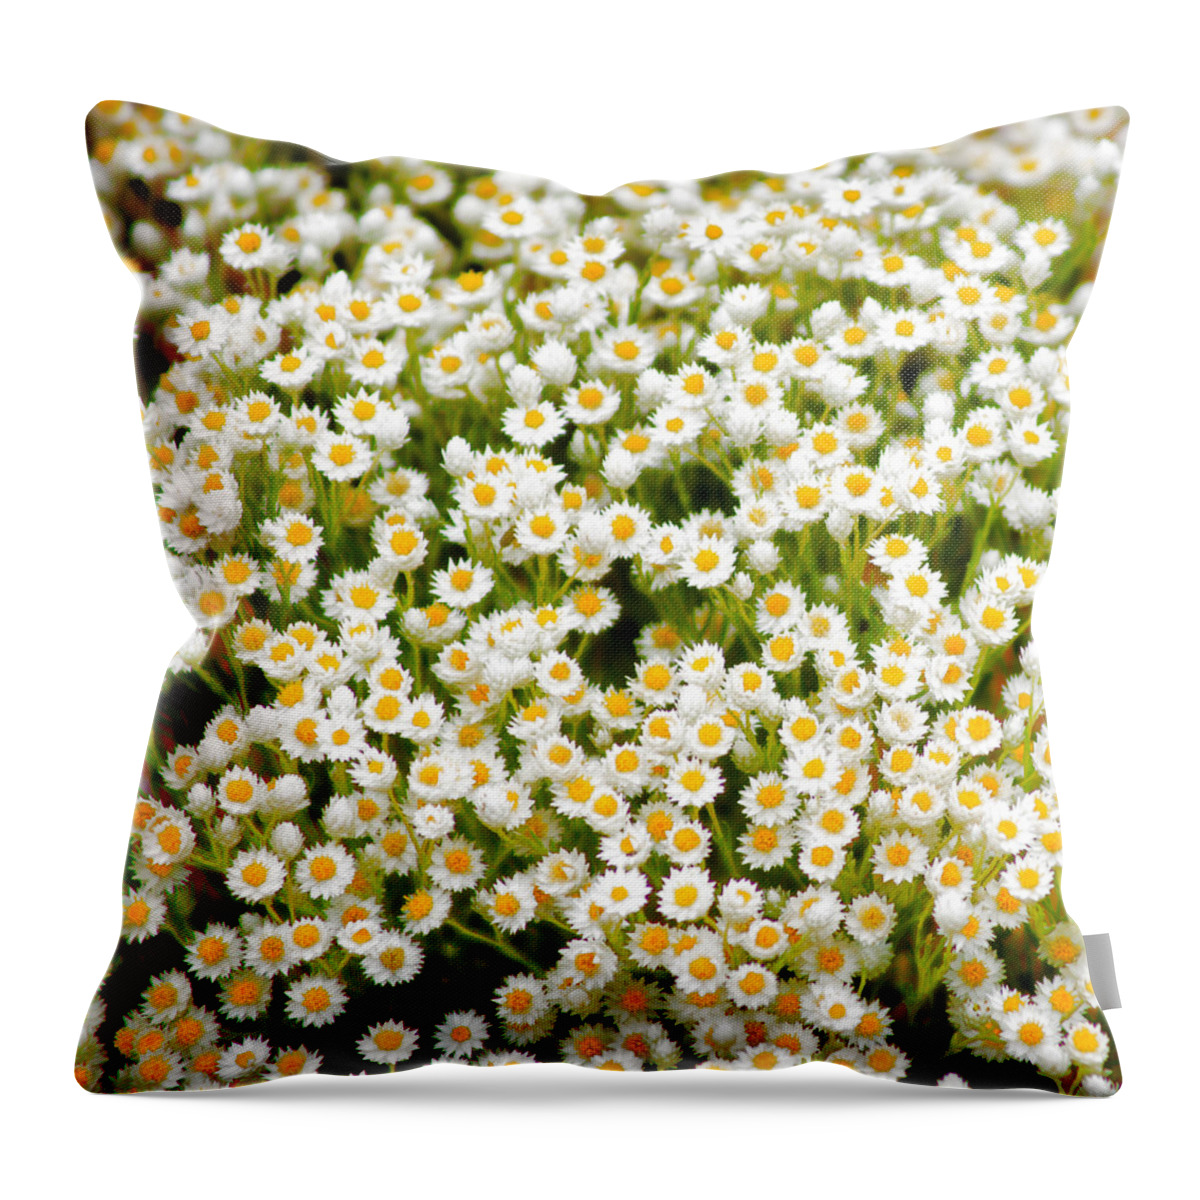 Flowers Throw Pillow featuring the photograph Wildflowers by Holly Kempe